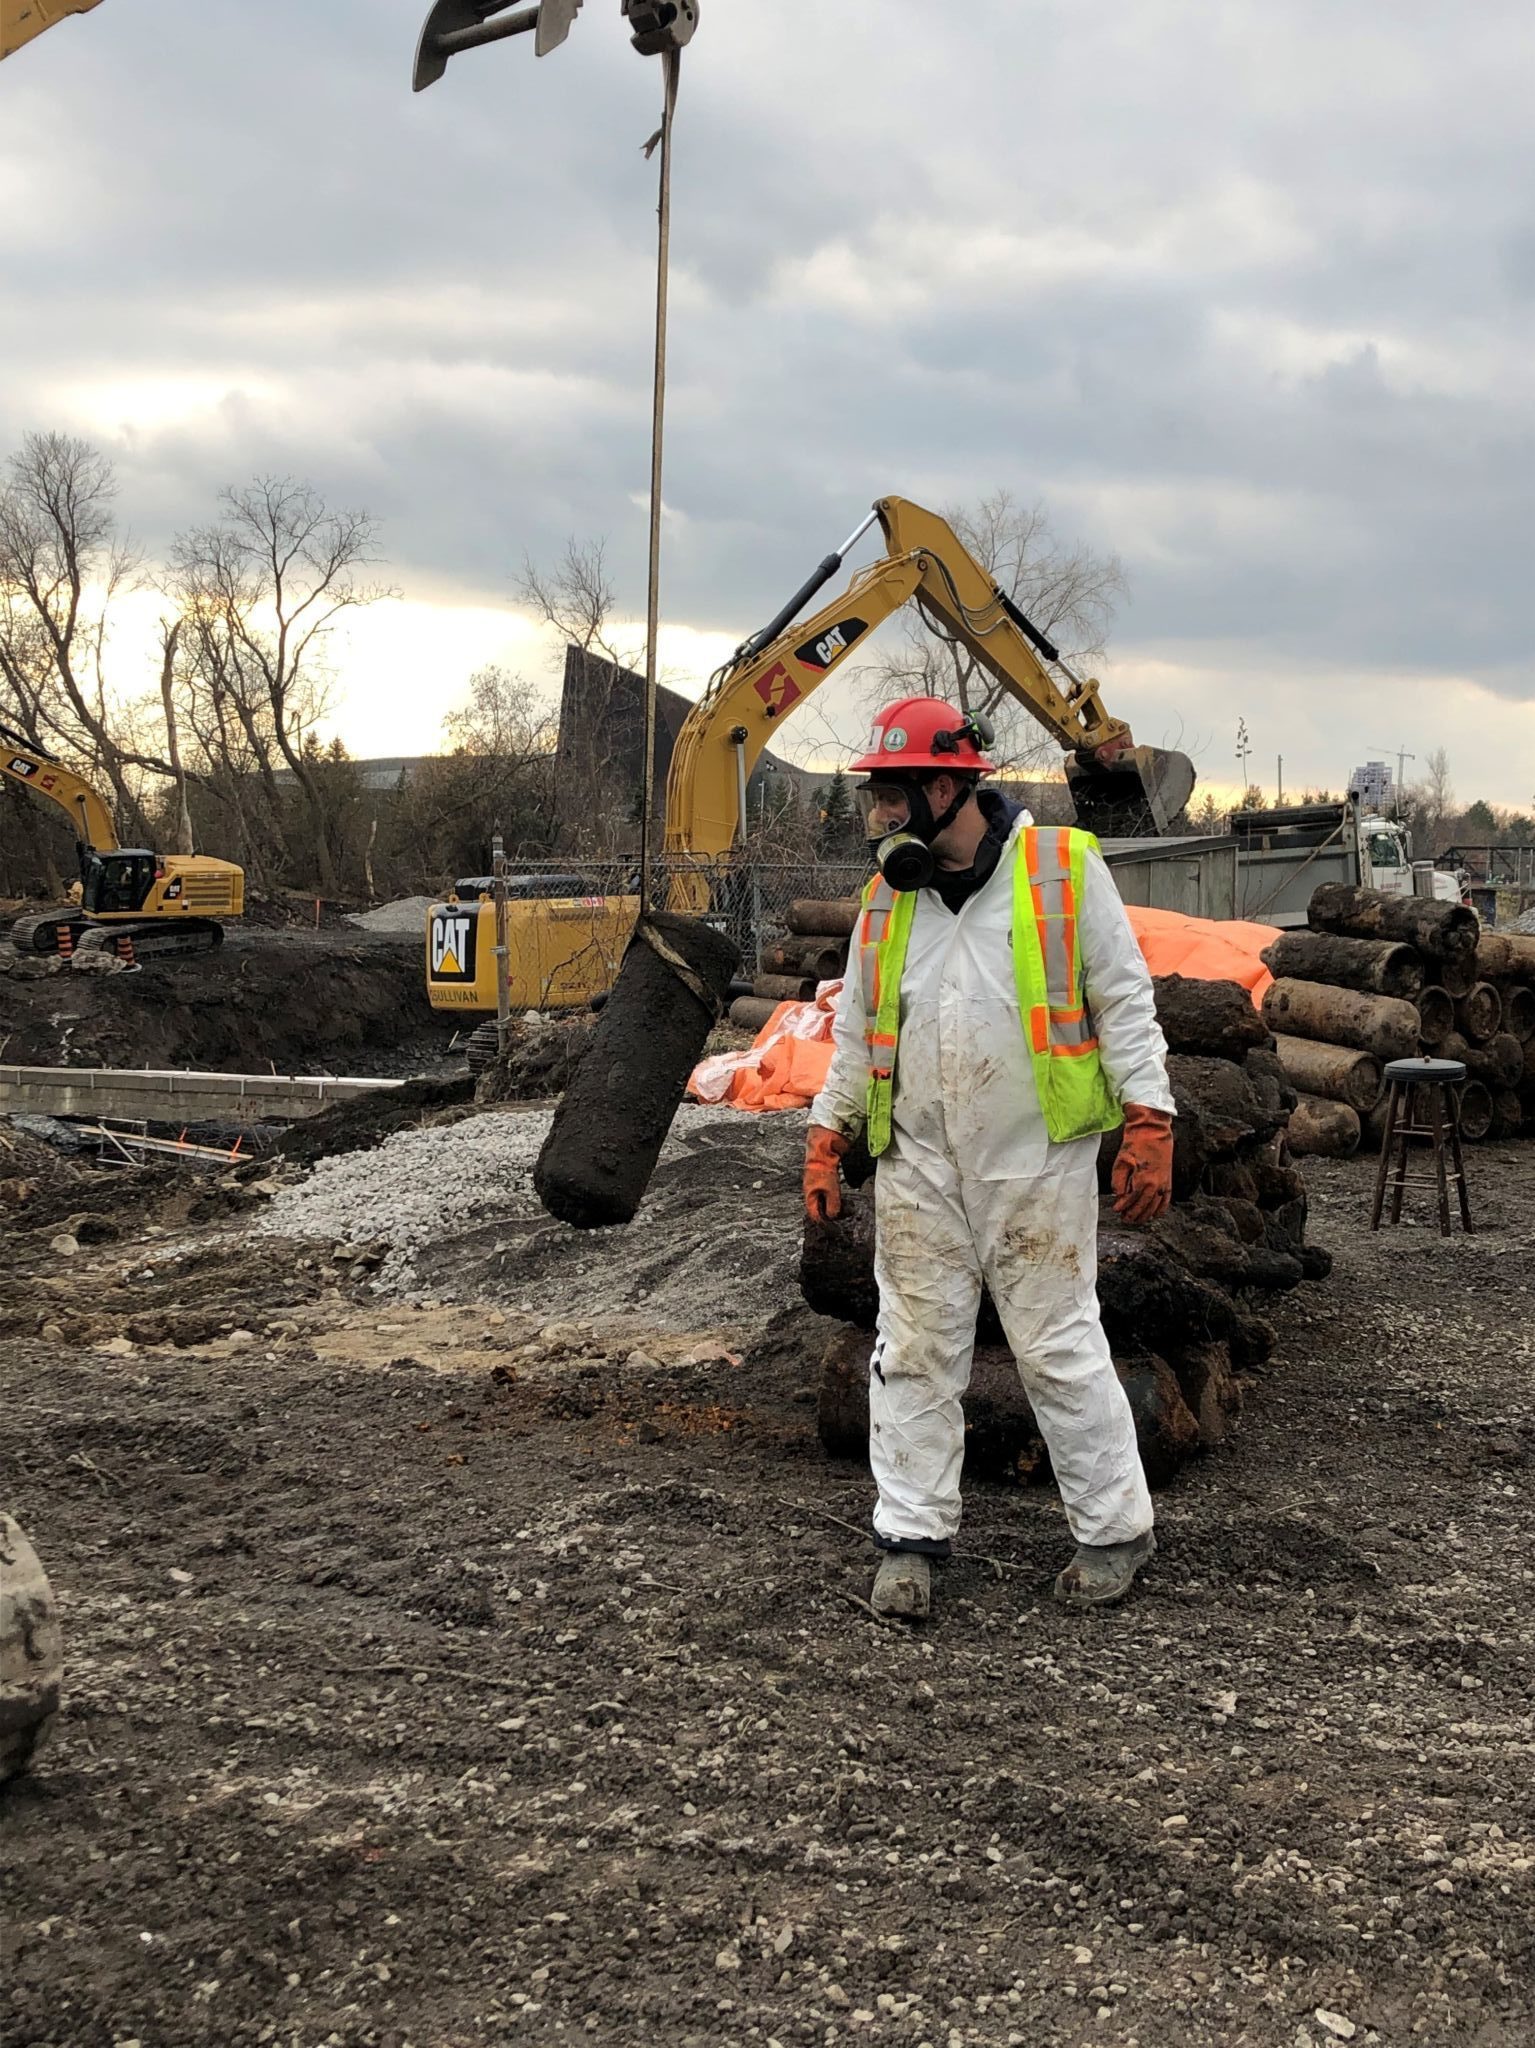 A worker geared up in a carbon-lined suit and full-face respirator stands in front of a pile of acetylene gas cylinders. In the background, there are mechanical excavators.